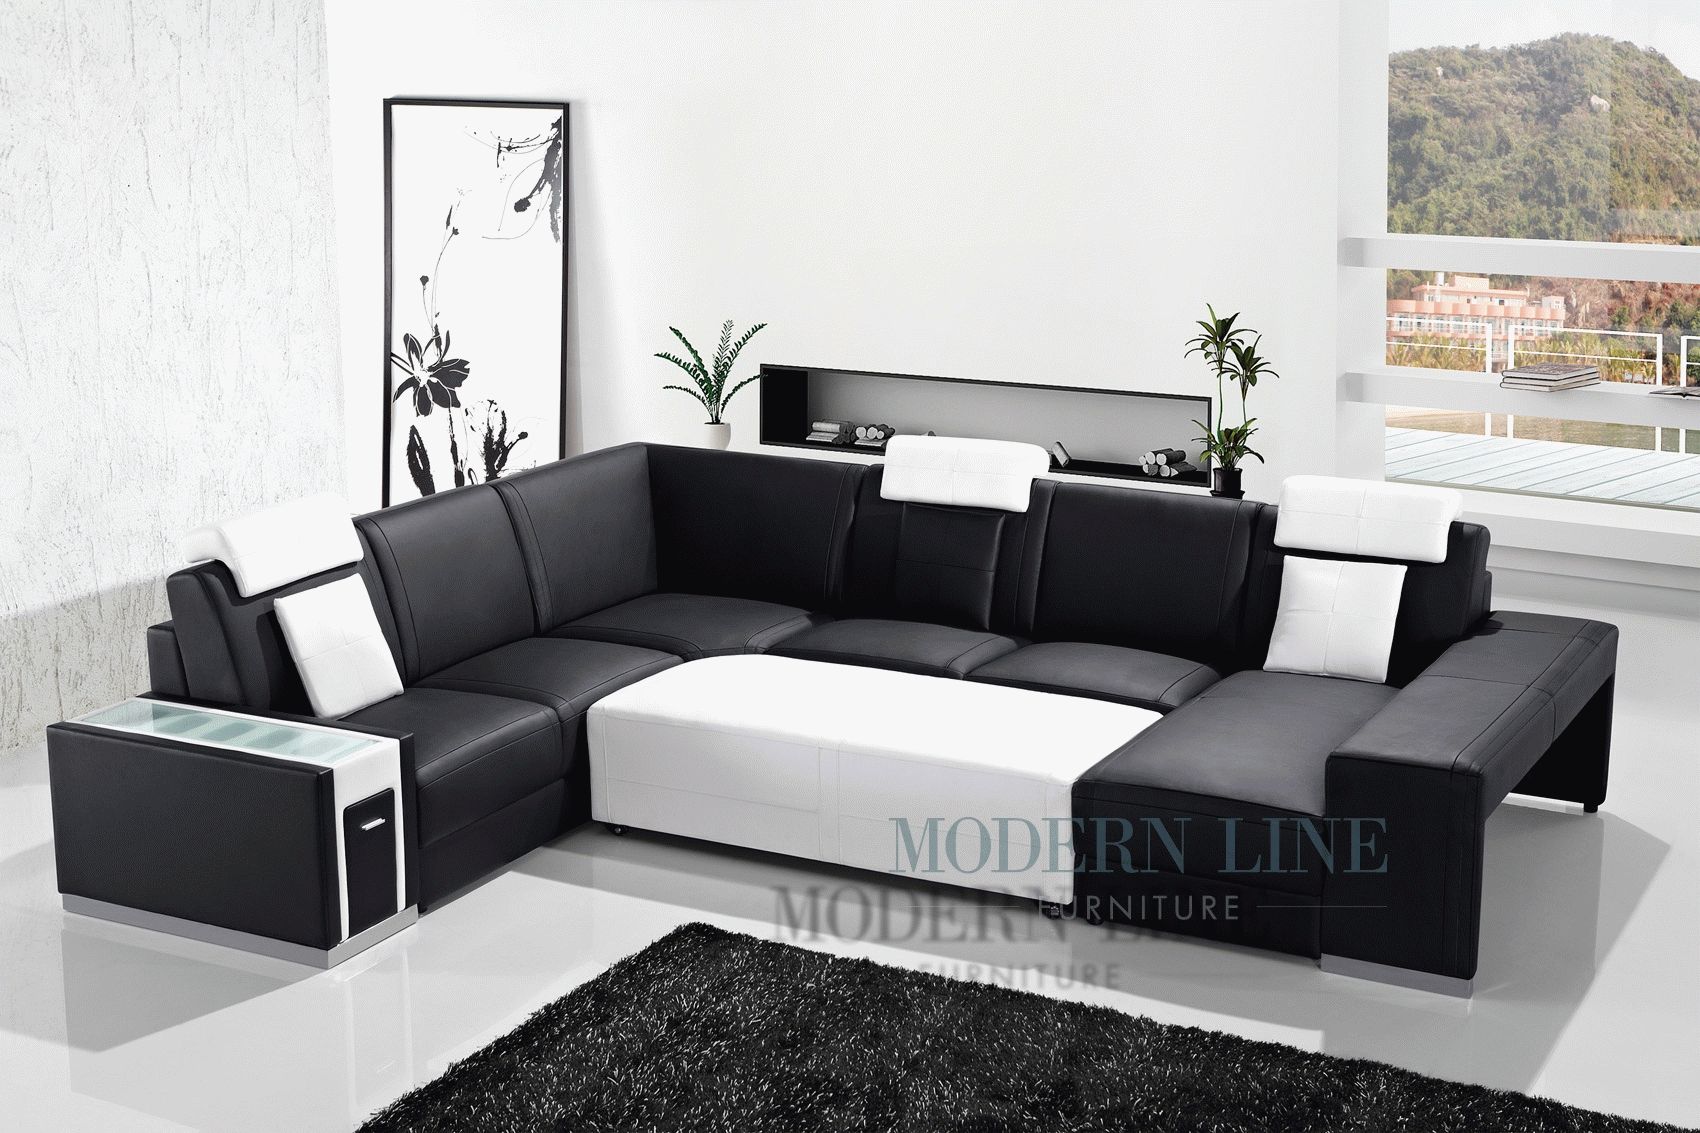 Large Sectional Sofa With Ottoman | Tehranmix Decoration Within Sectional Sofa With Large Ottoman (View 4 of 20)